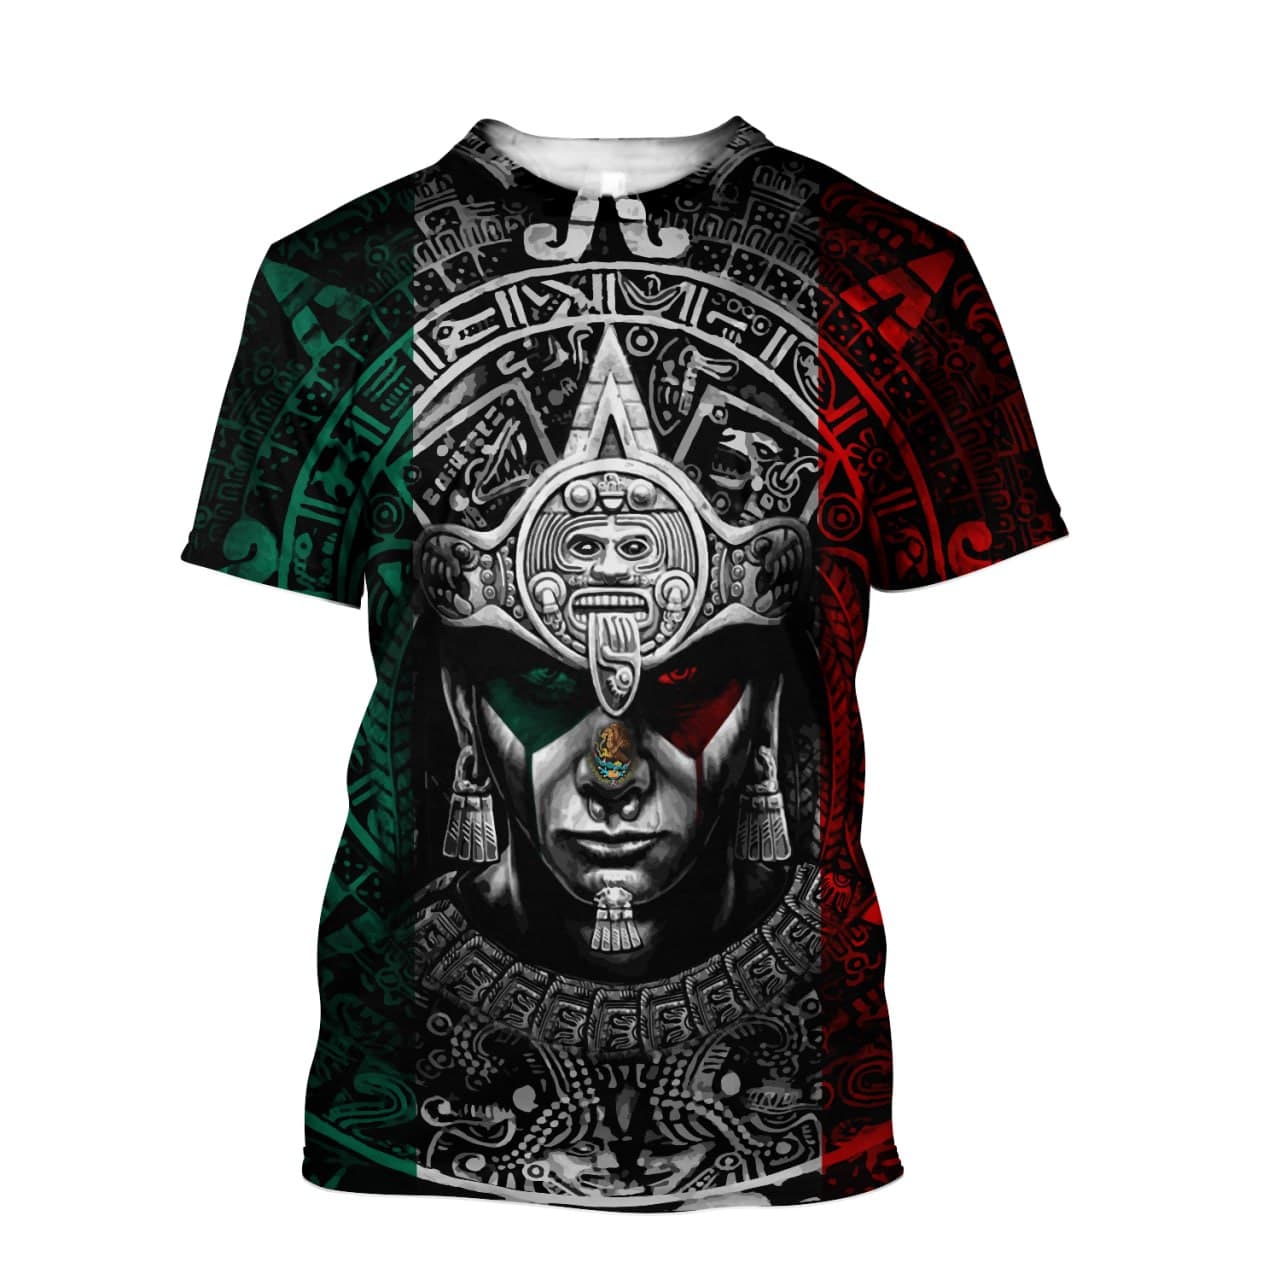 Tmarc Tee Aztec Mexican Combo T-shirt and Short DQB